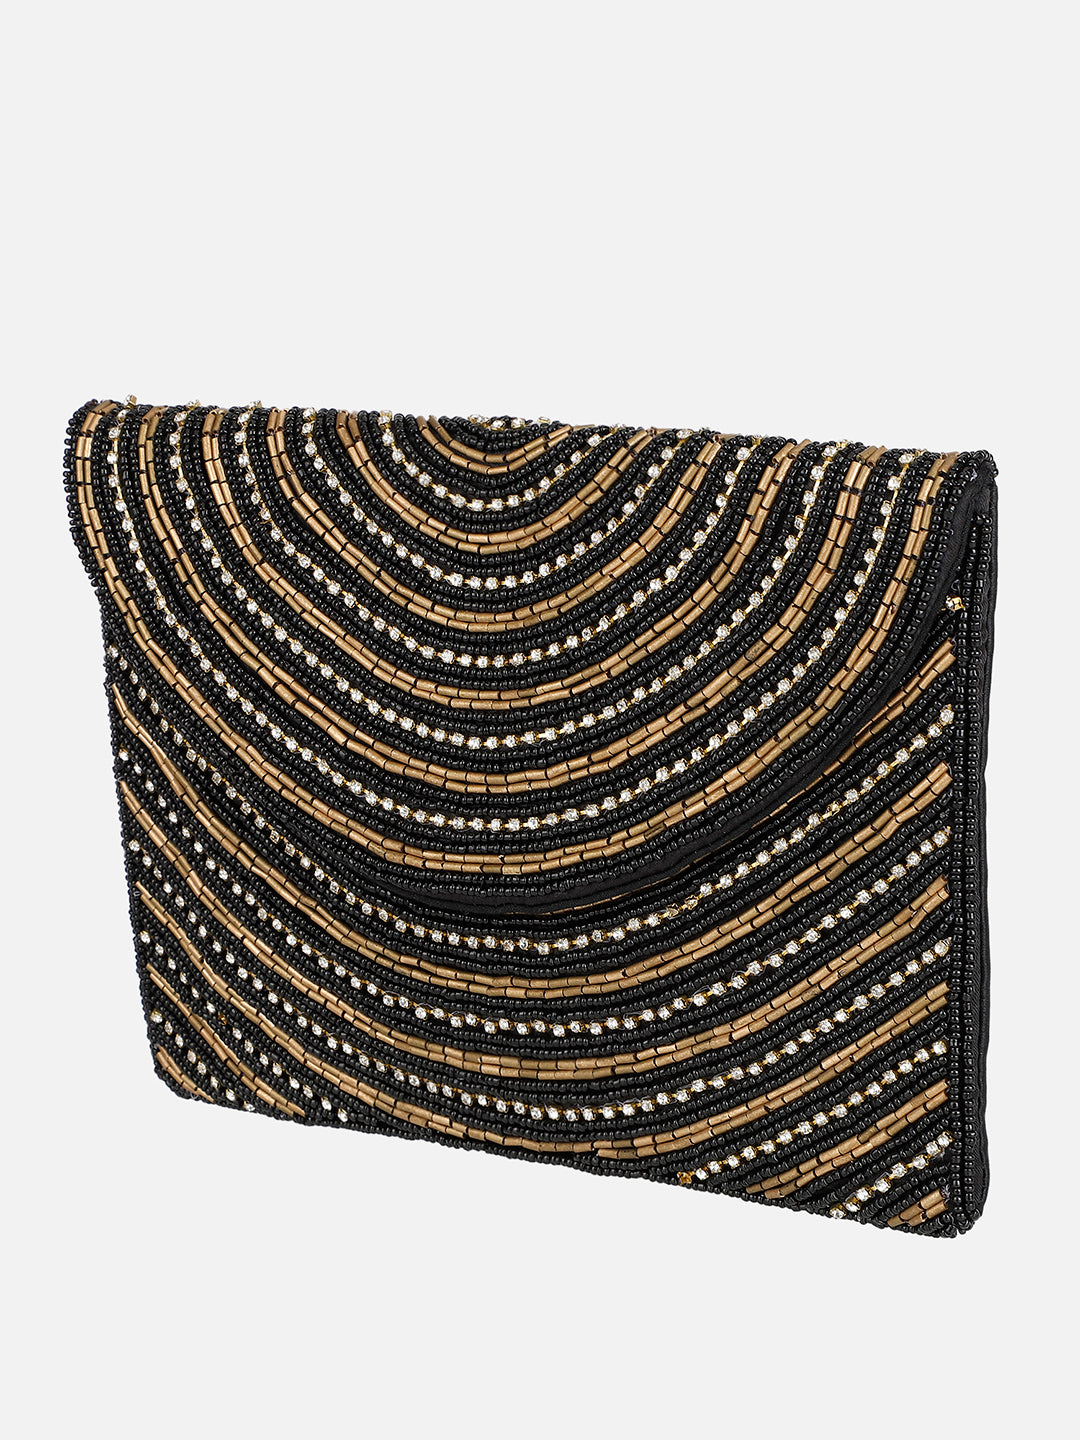 Embroidered Black and Golden Clutch